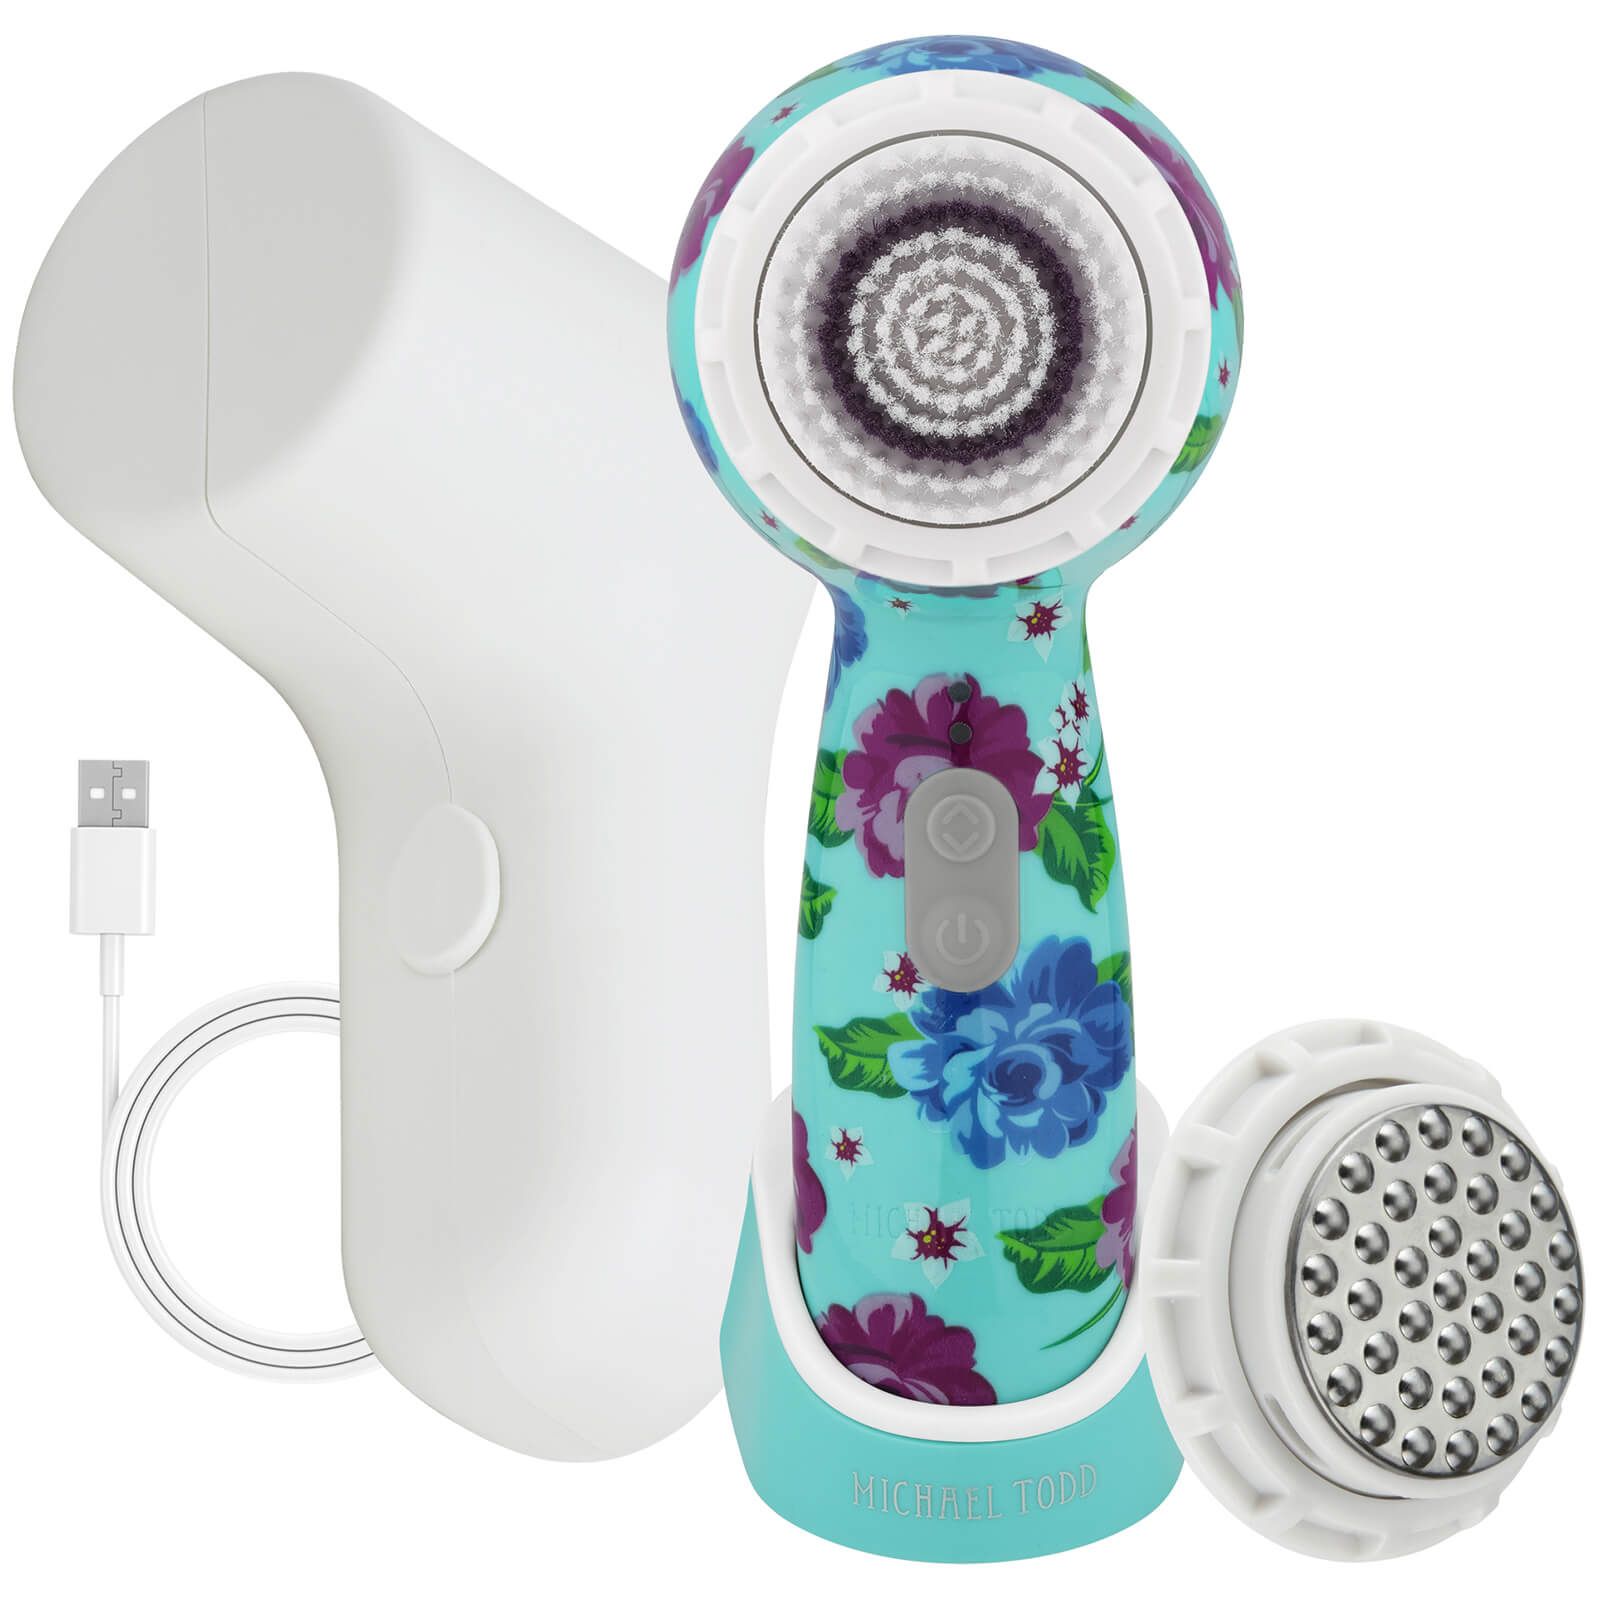 Michael Todd Beauty Soniclear Petite Antimicrobial Sonic Skin Cleansing System (Various Shades) | Skinstore